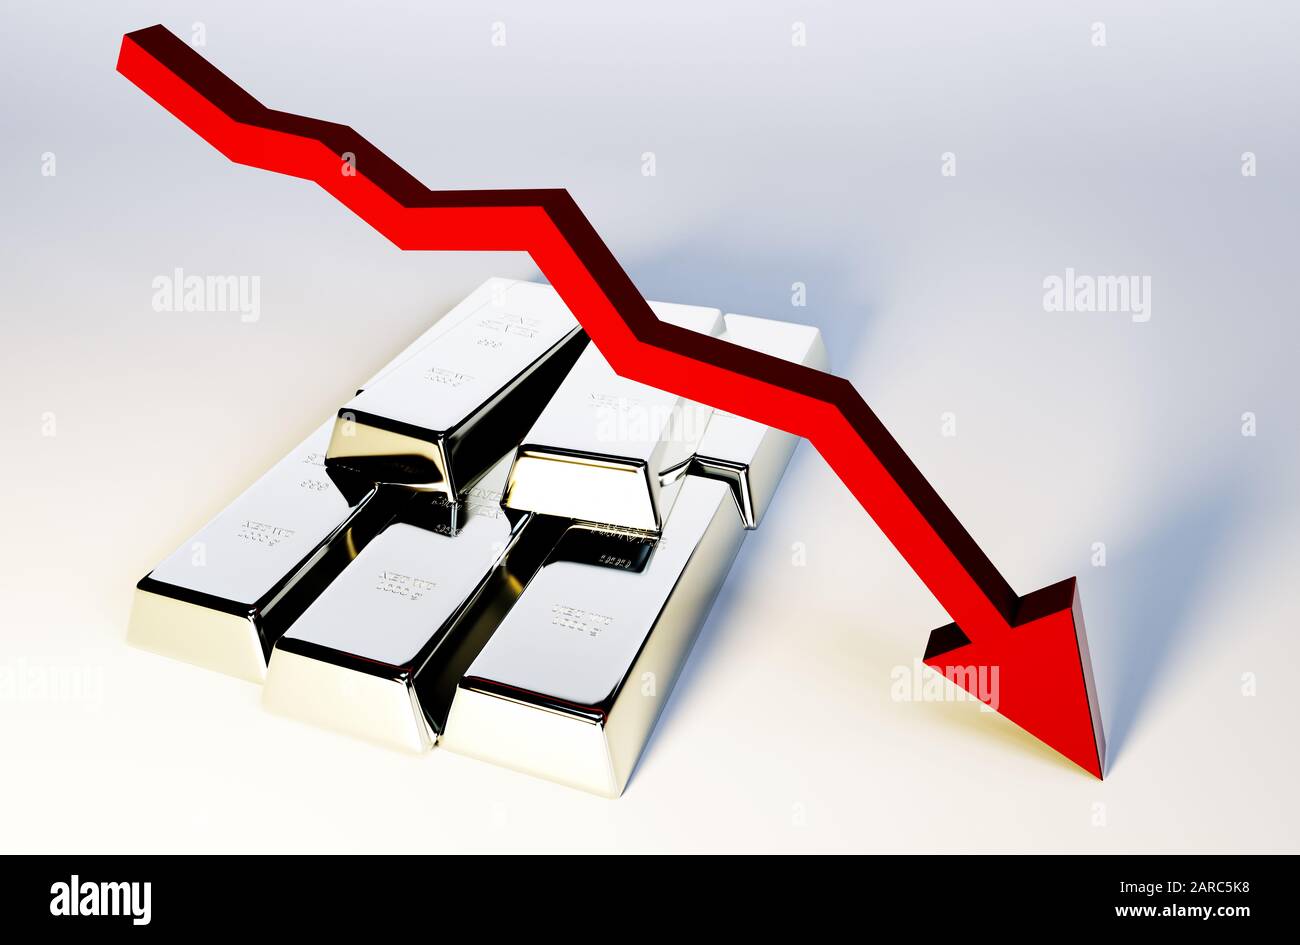 3d render image of silver bars with declining graph Stock Photo